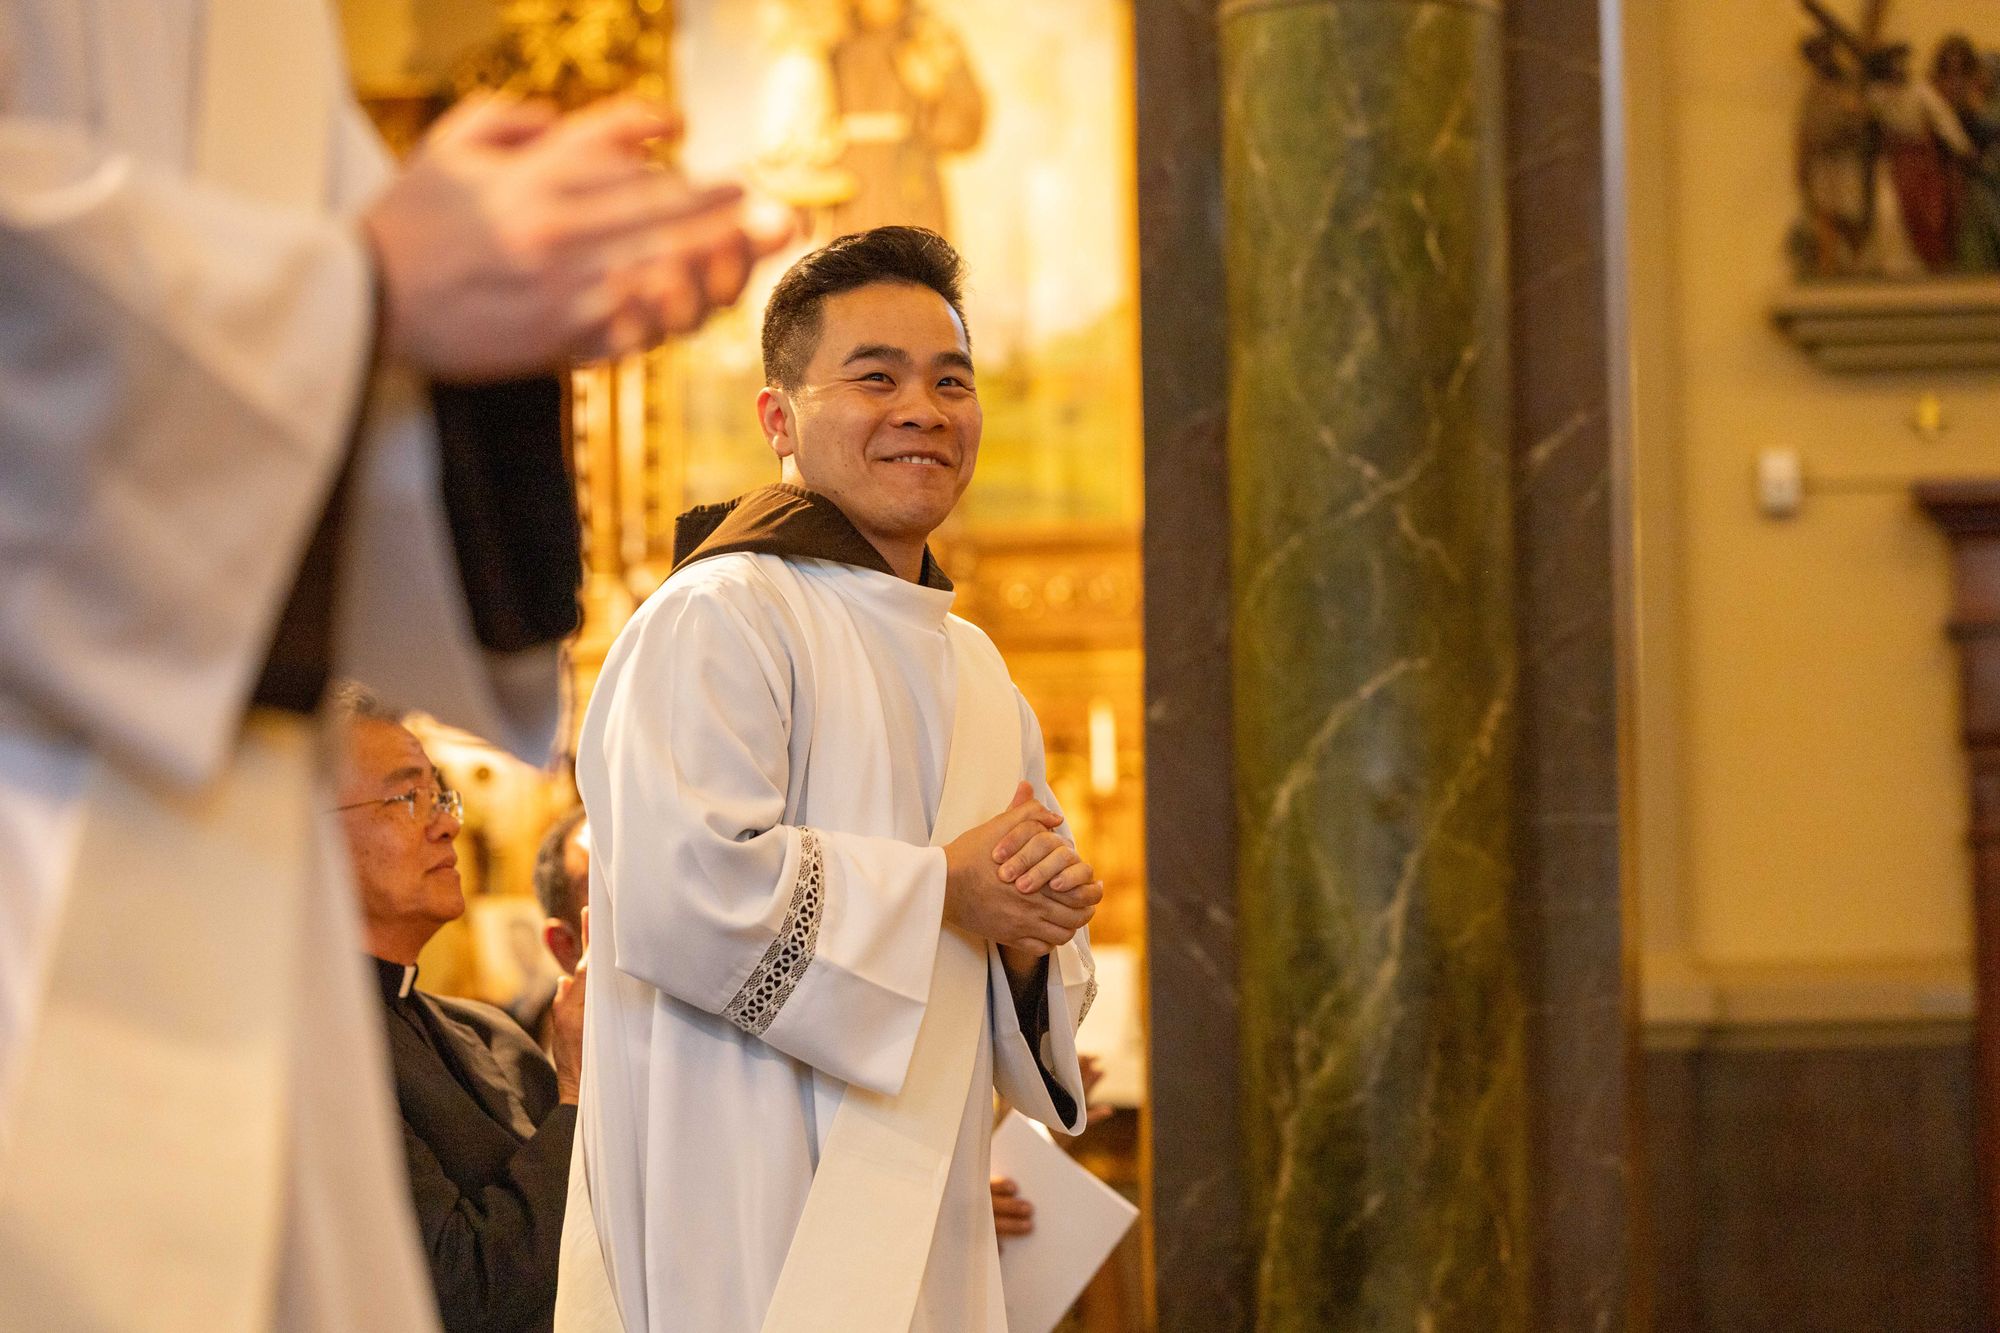 Color interior photograph of a smiling Br. Truong Tien Dinh, OFM Cap. in vestments at his ordination.